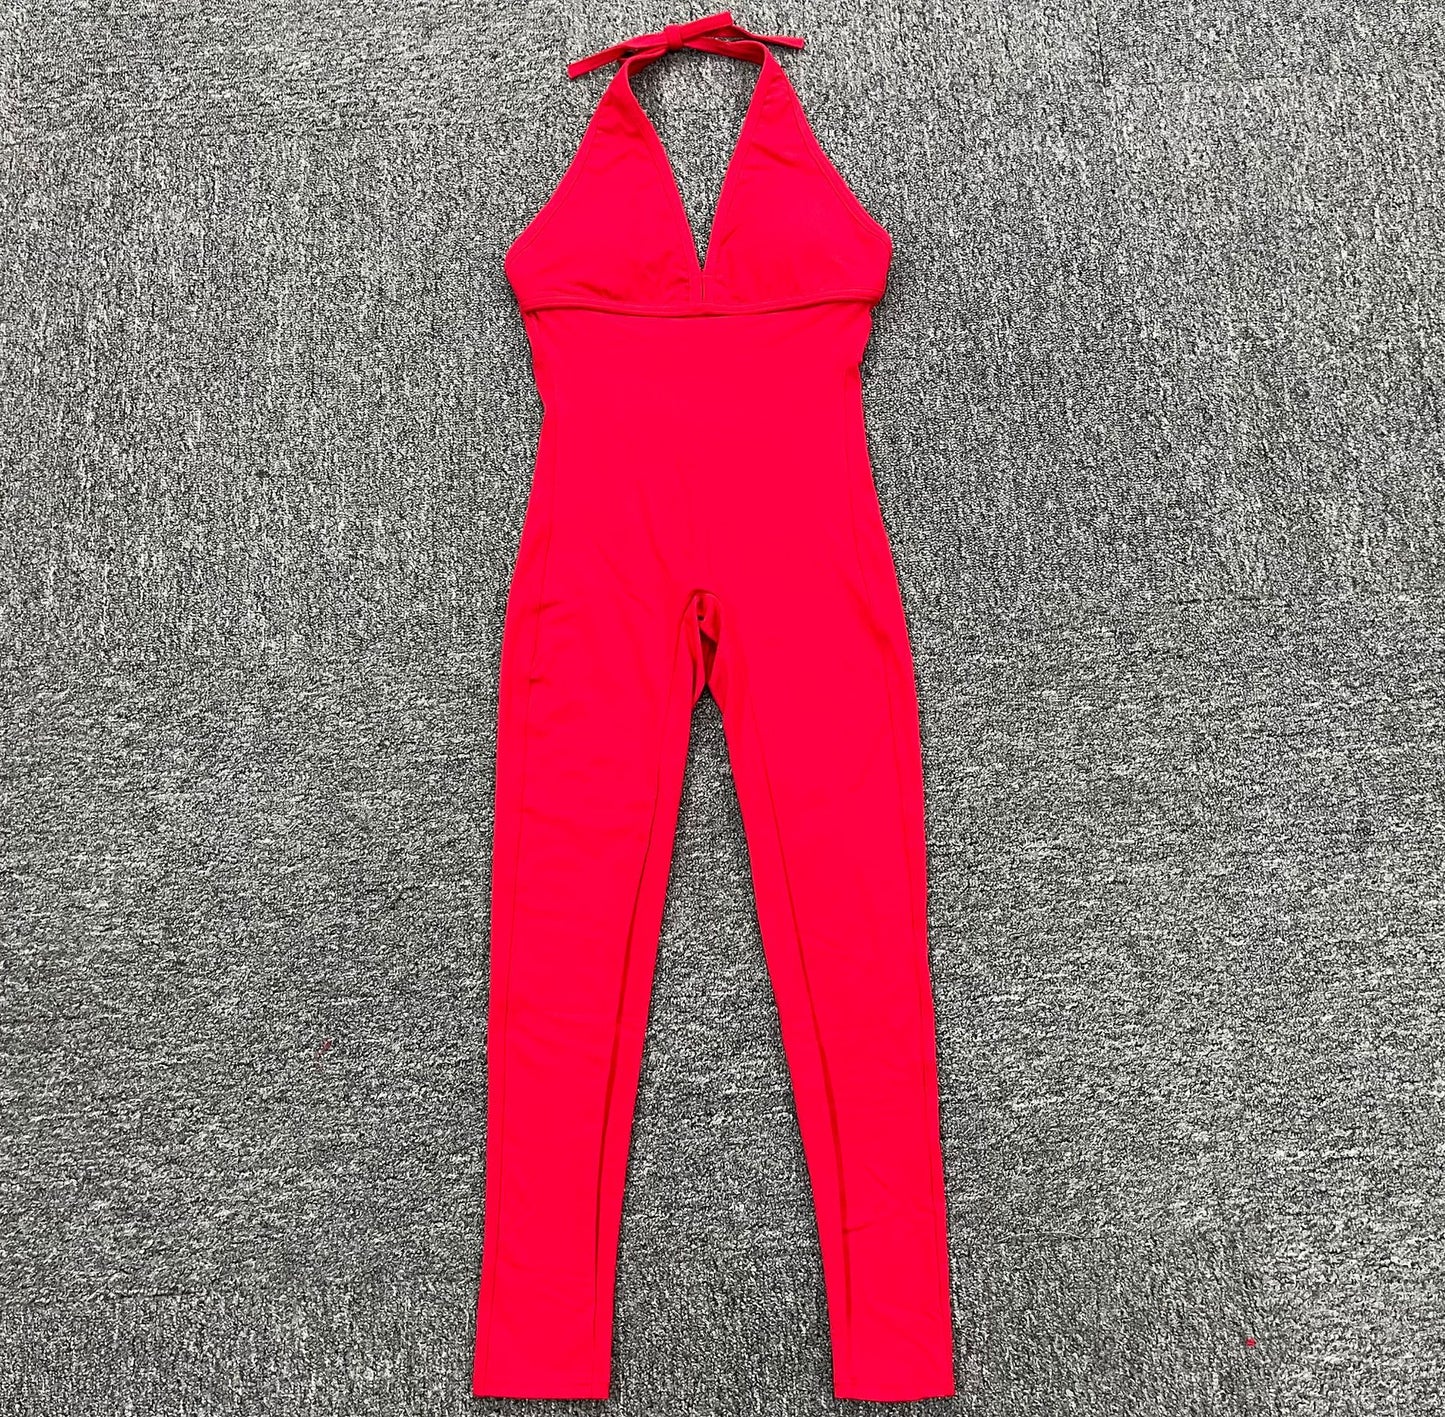 Sexy Quick Drying Breath Freely Sport Jumpsuits